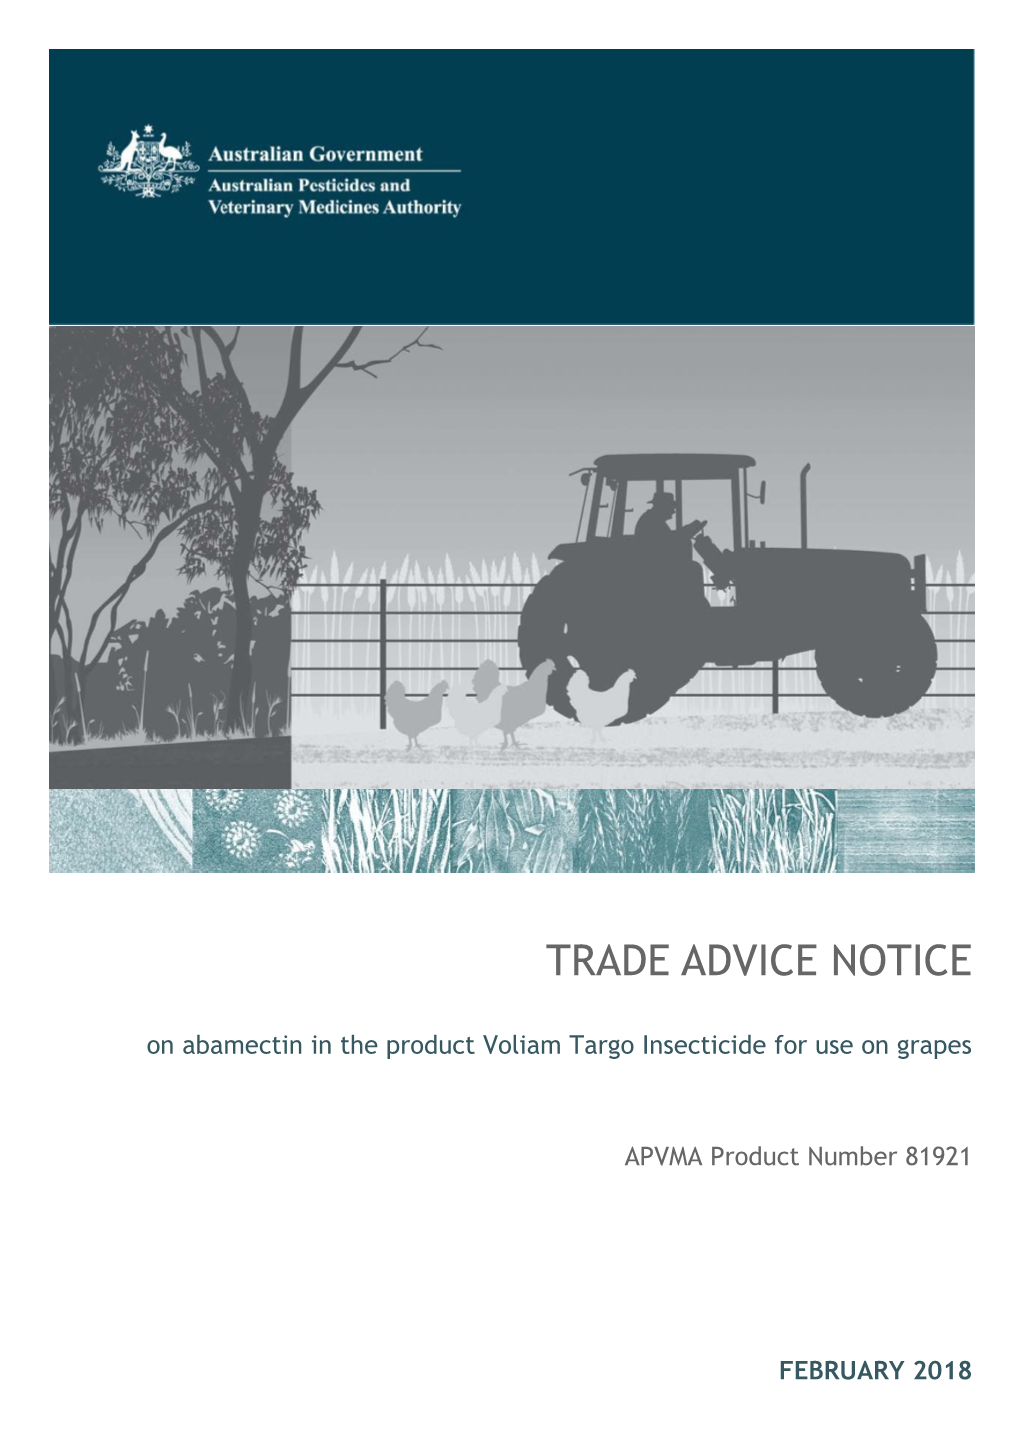 Trade Advice Notice on Abamectin in the Product Voliam Targo Insecticide for Use on Grapes